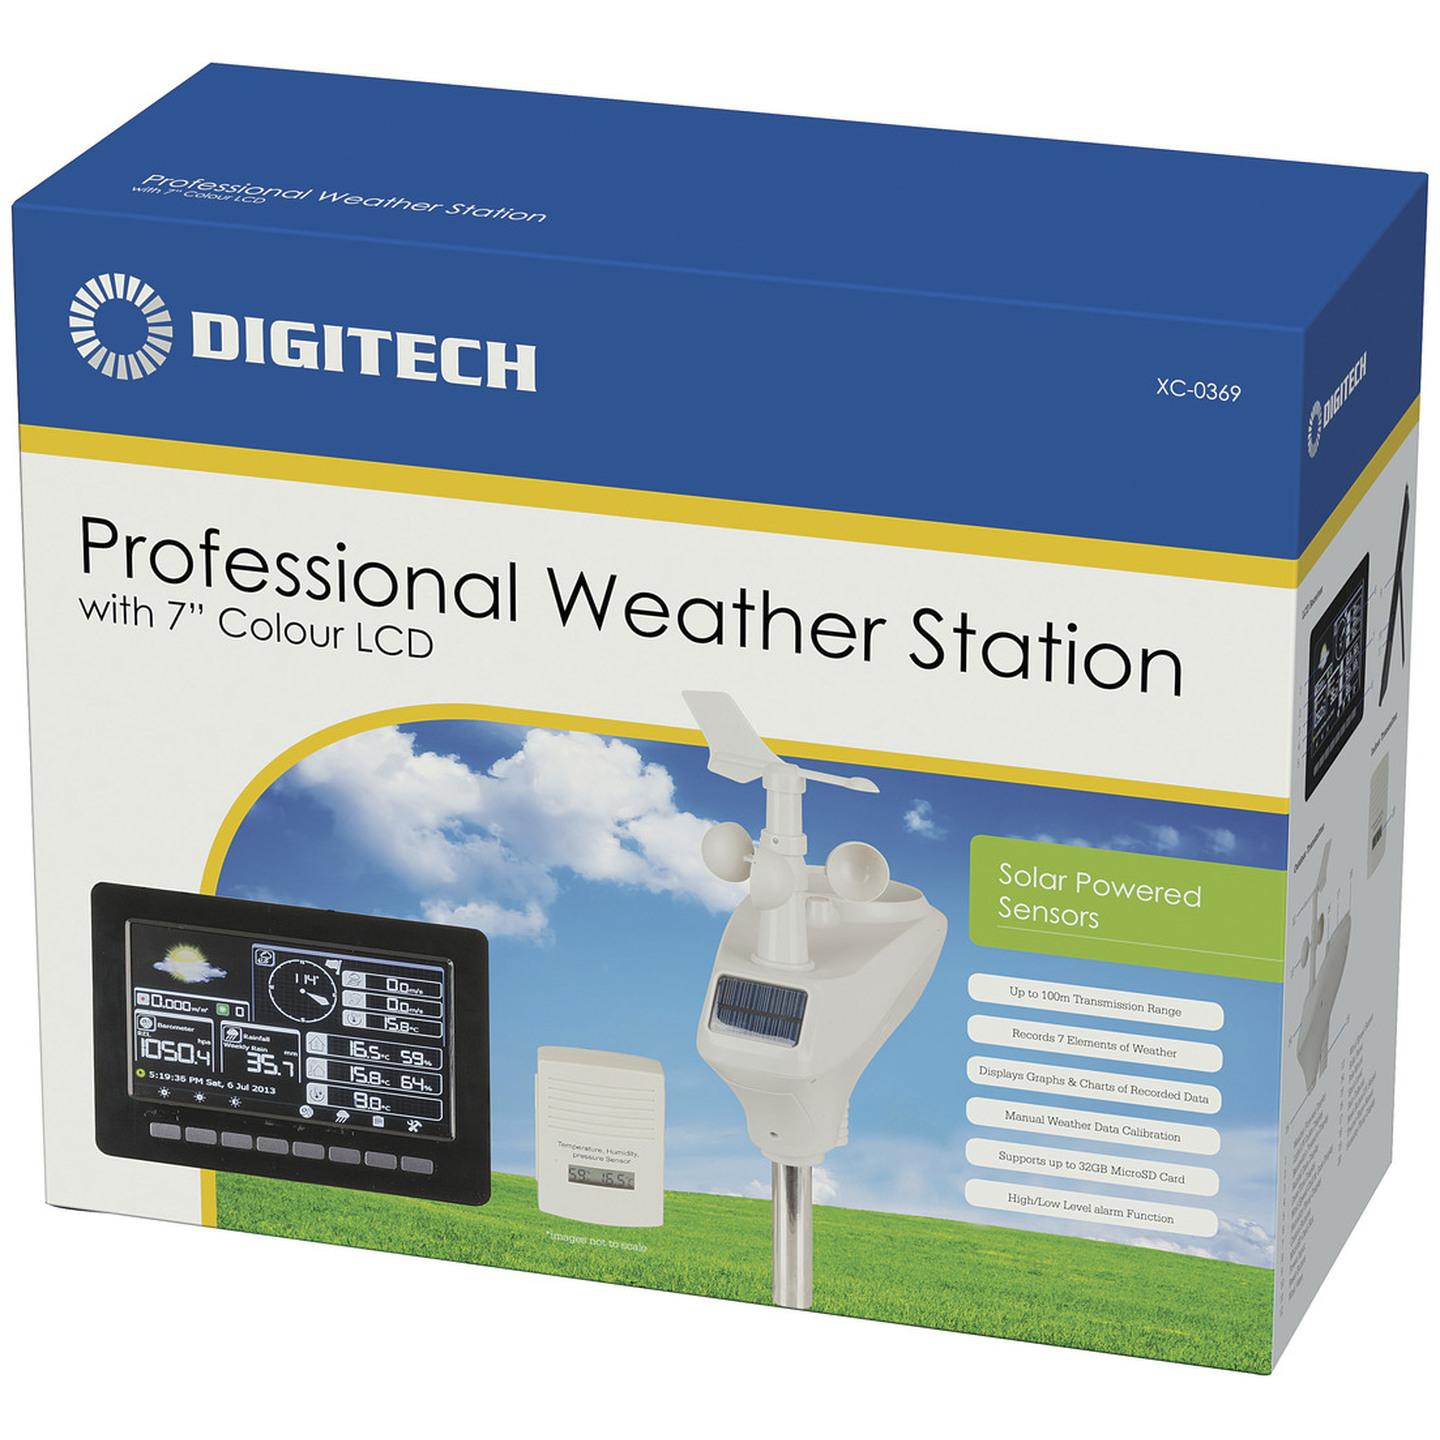 Professional Wireless Weather Station with 7 Colour LCD and Solar Powered Sensors